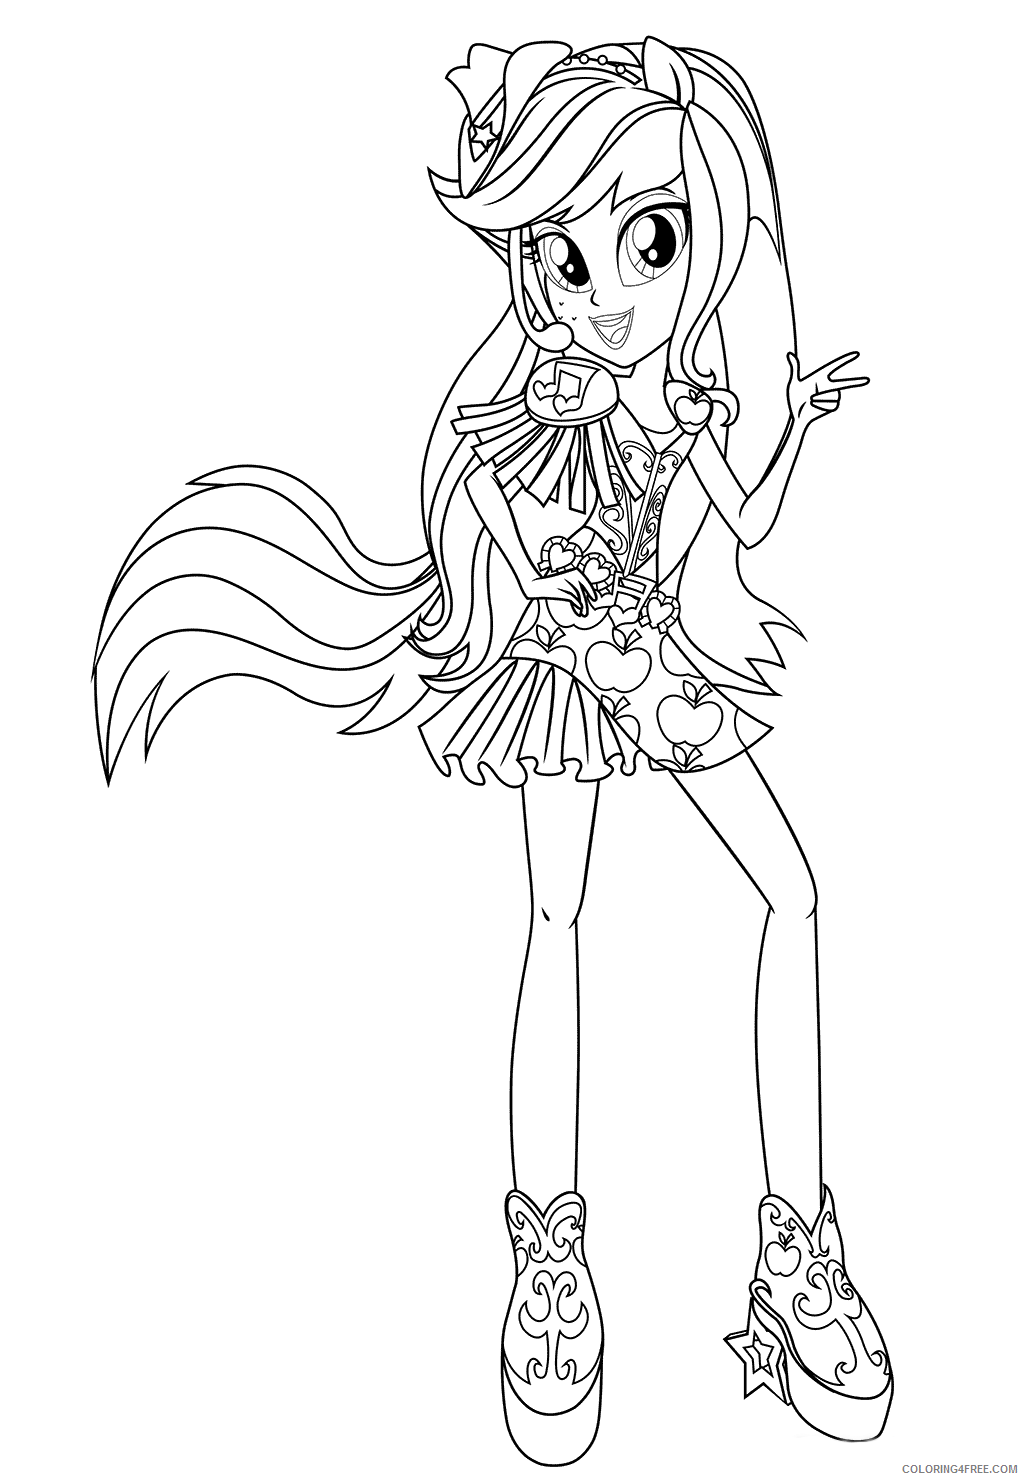 My Little Pony Equestria Girls Coloring Pages Cartoons Applejack Equestria Girl Printable 2020 4591 Coloring4free